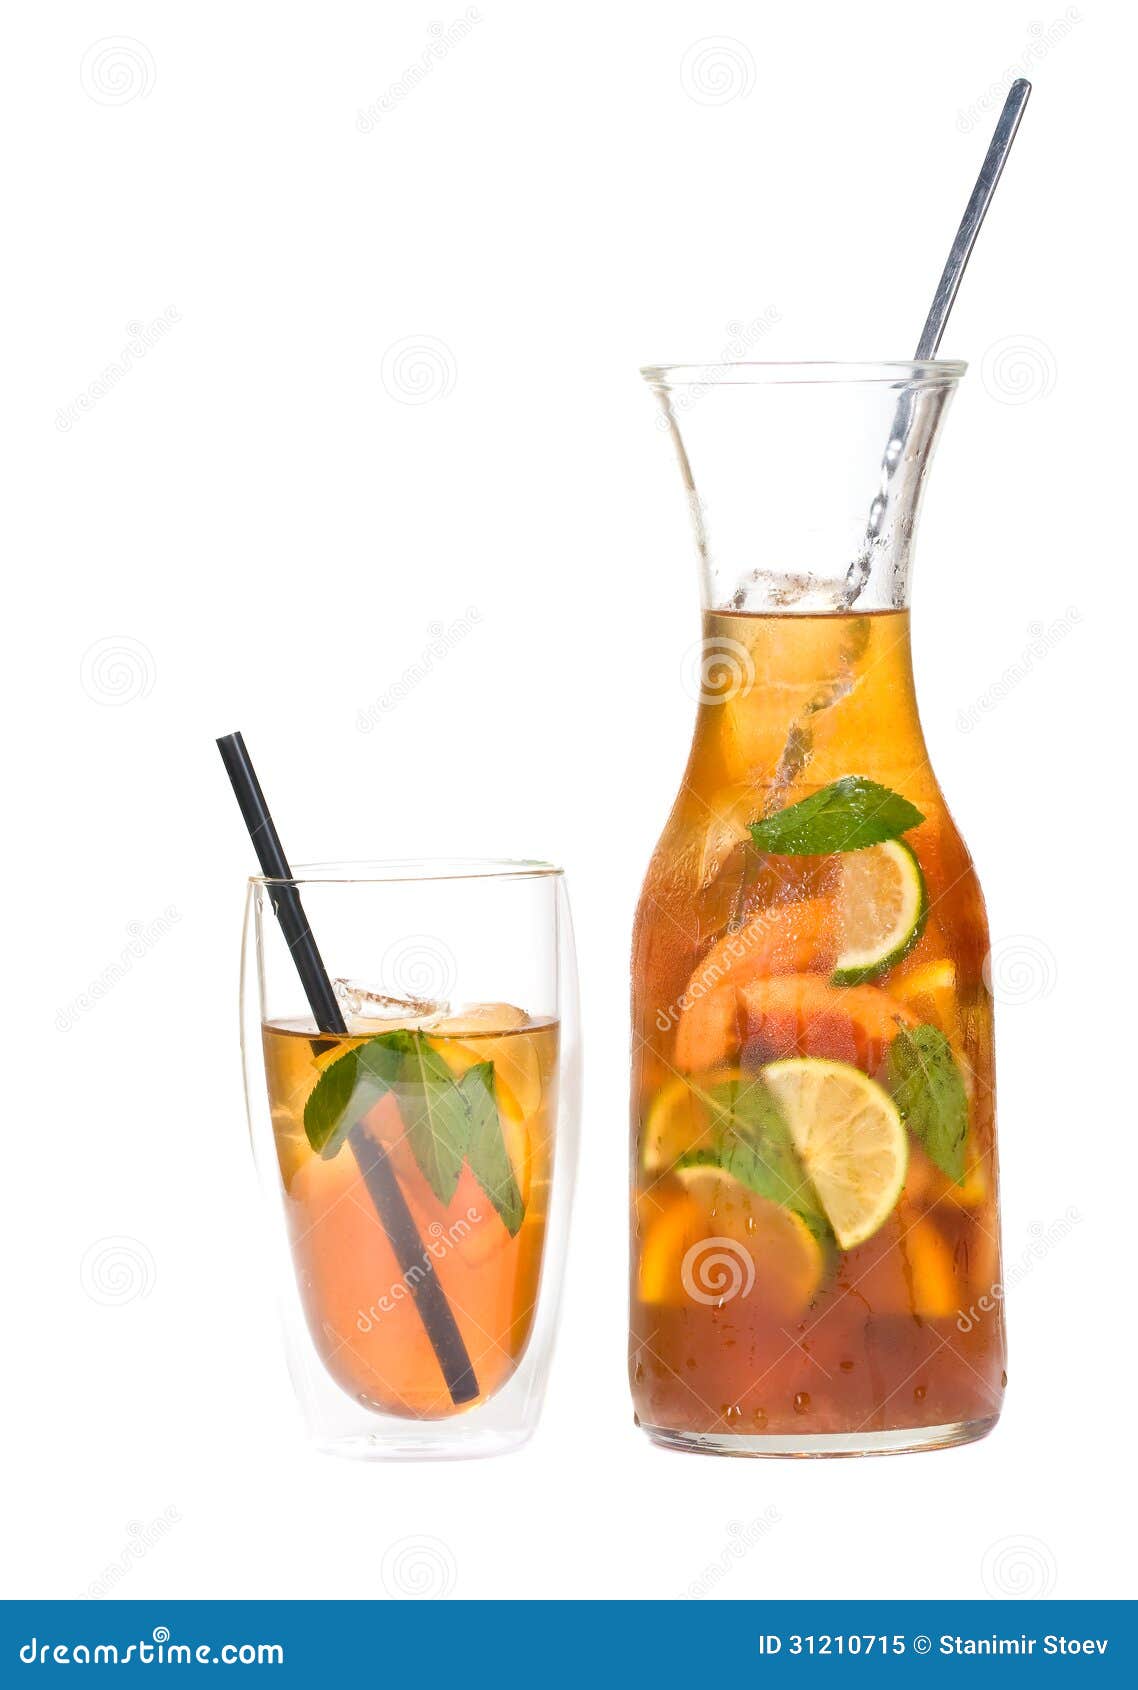 https://thumbs.dreamstime.com/z/iced-tea-citrus-sweaty-pitcher-slices-lime-orange-mint-leaves-isolated-white-background-31210715.jpg